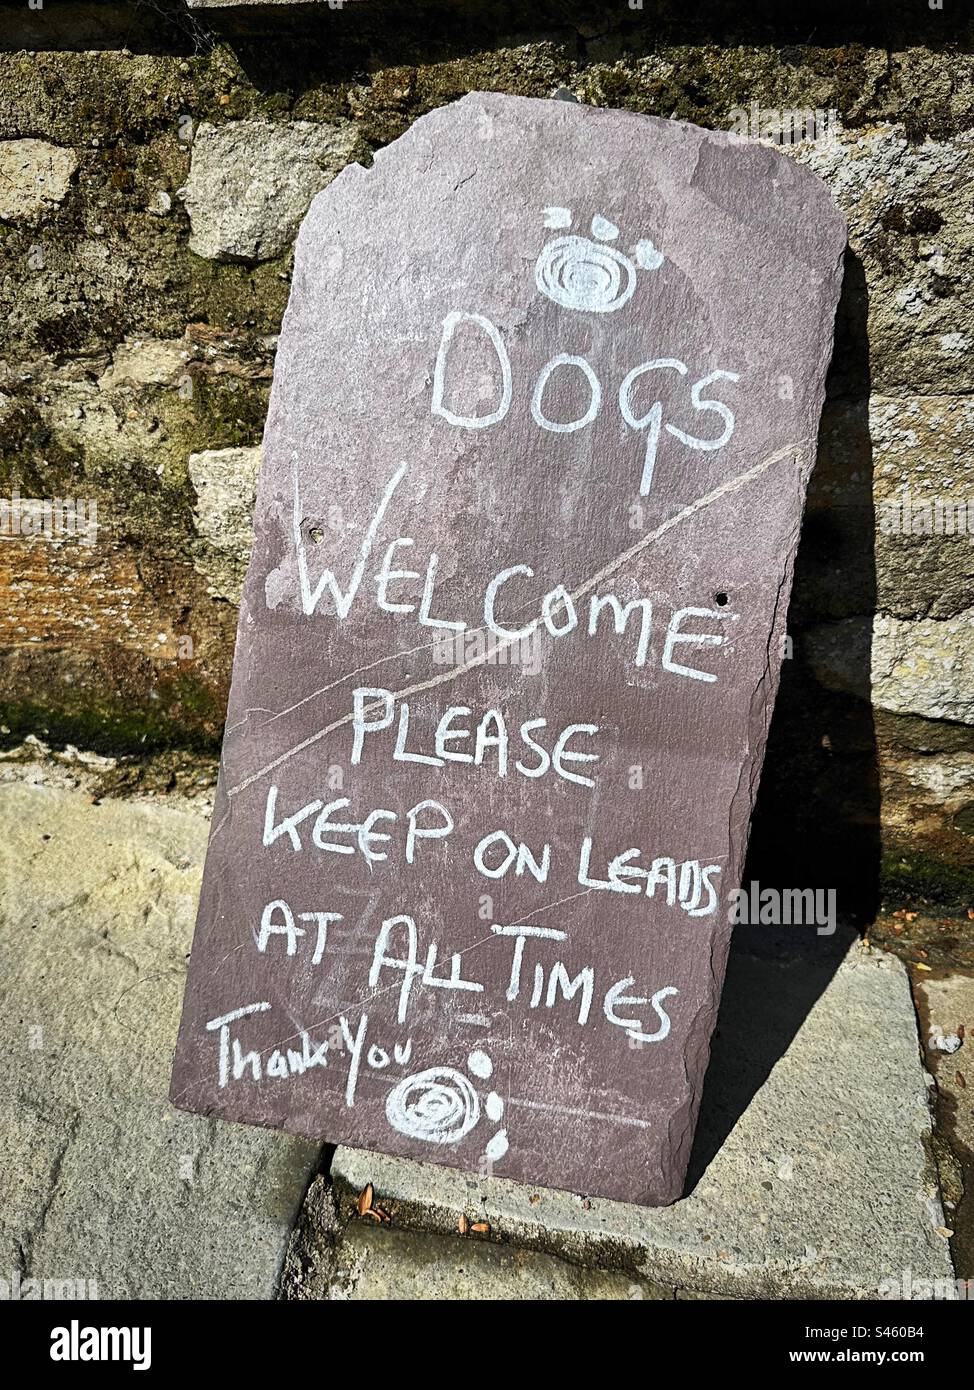 ‘Dogs Welcome’ a handwritten sign invites dogs and their owners inside… as long as they are on a lead at all times. Stock Photo